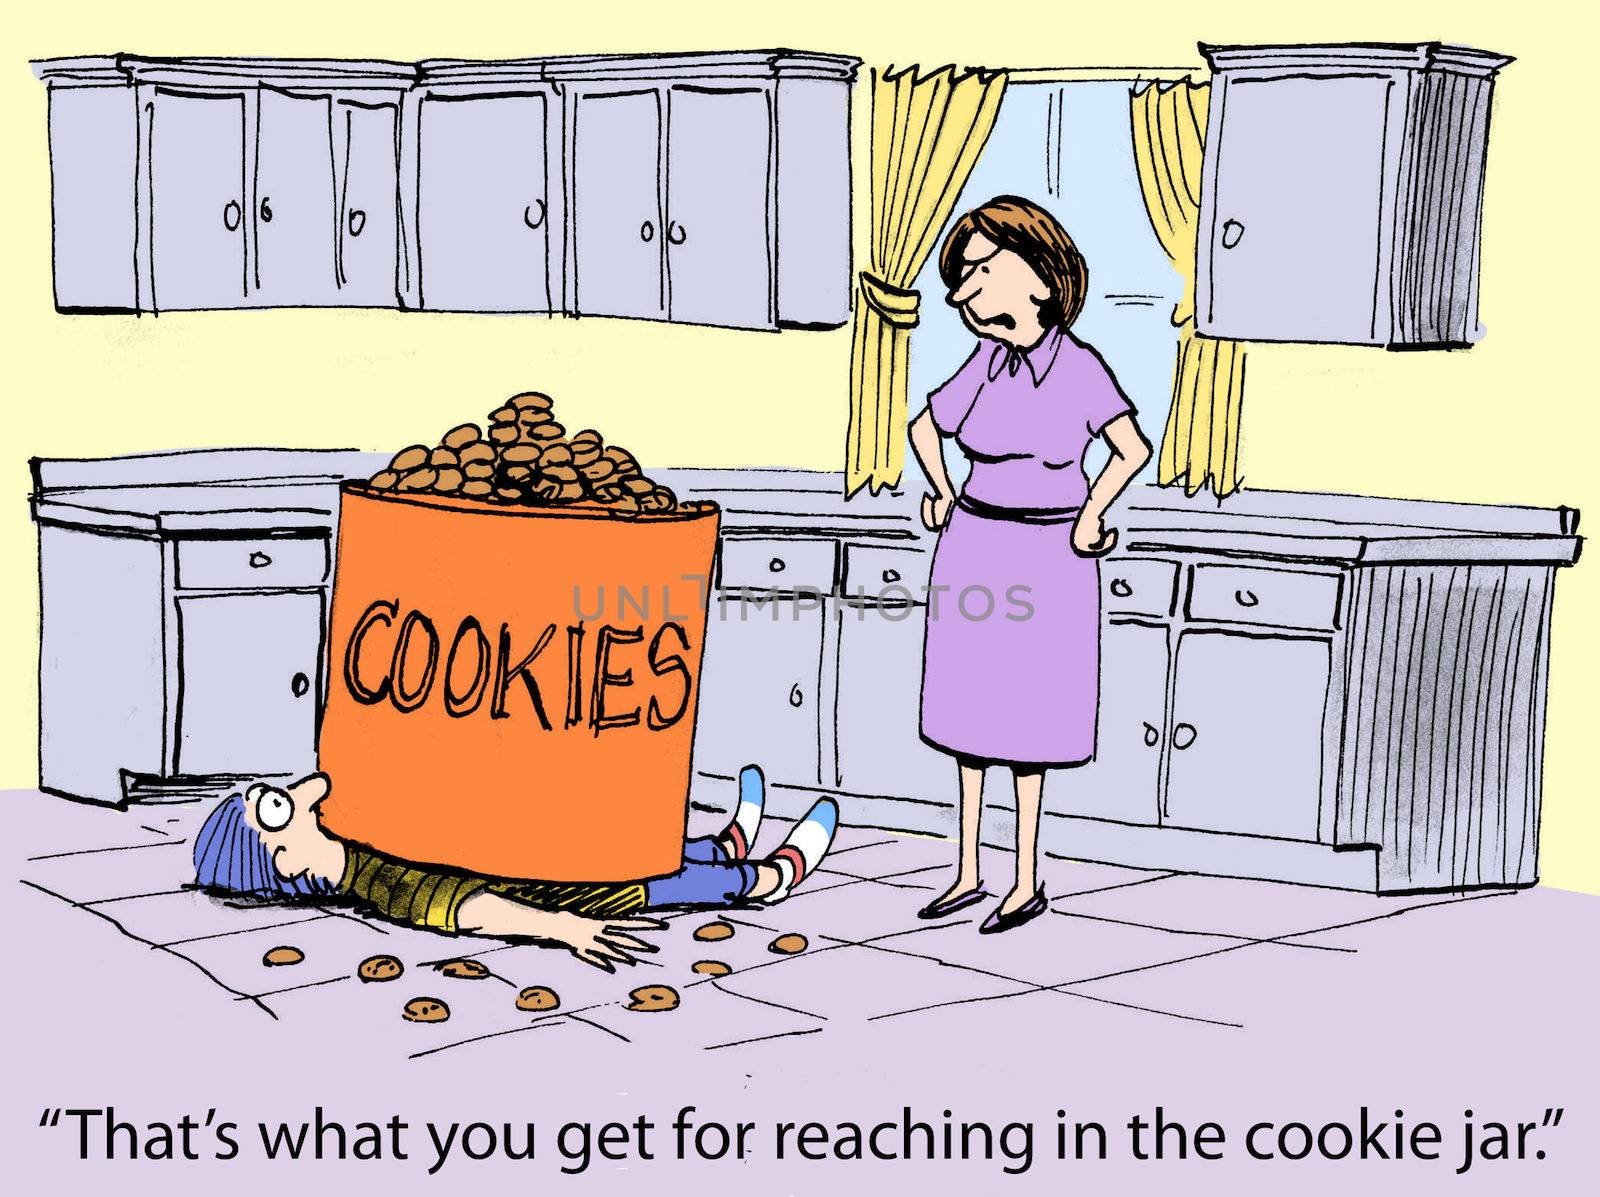 "That's what you get for reaching in the cookie jar."